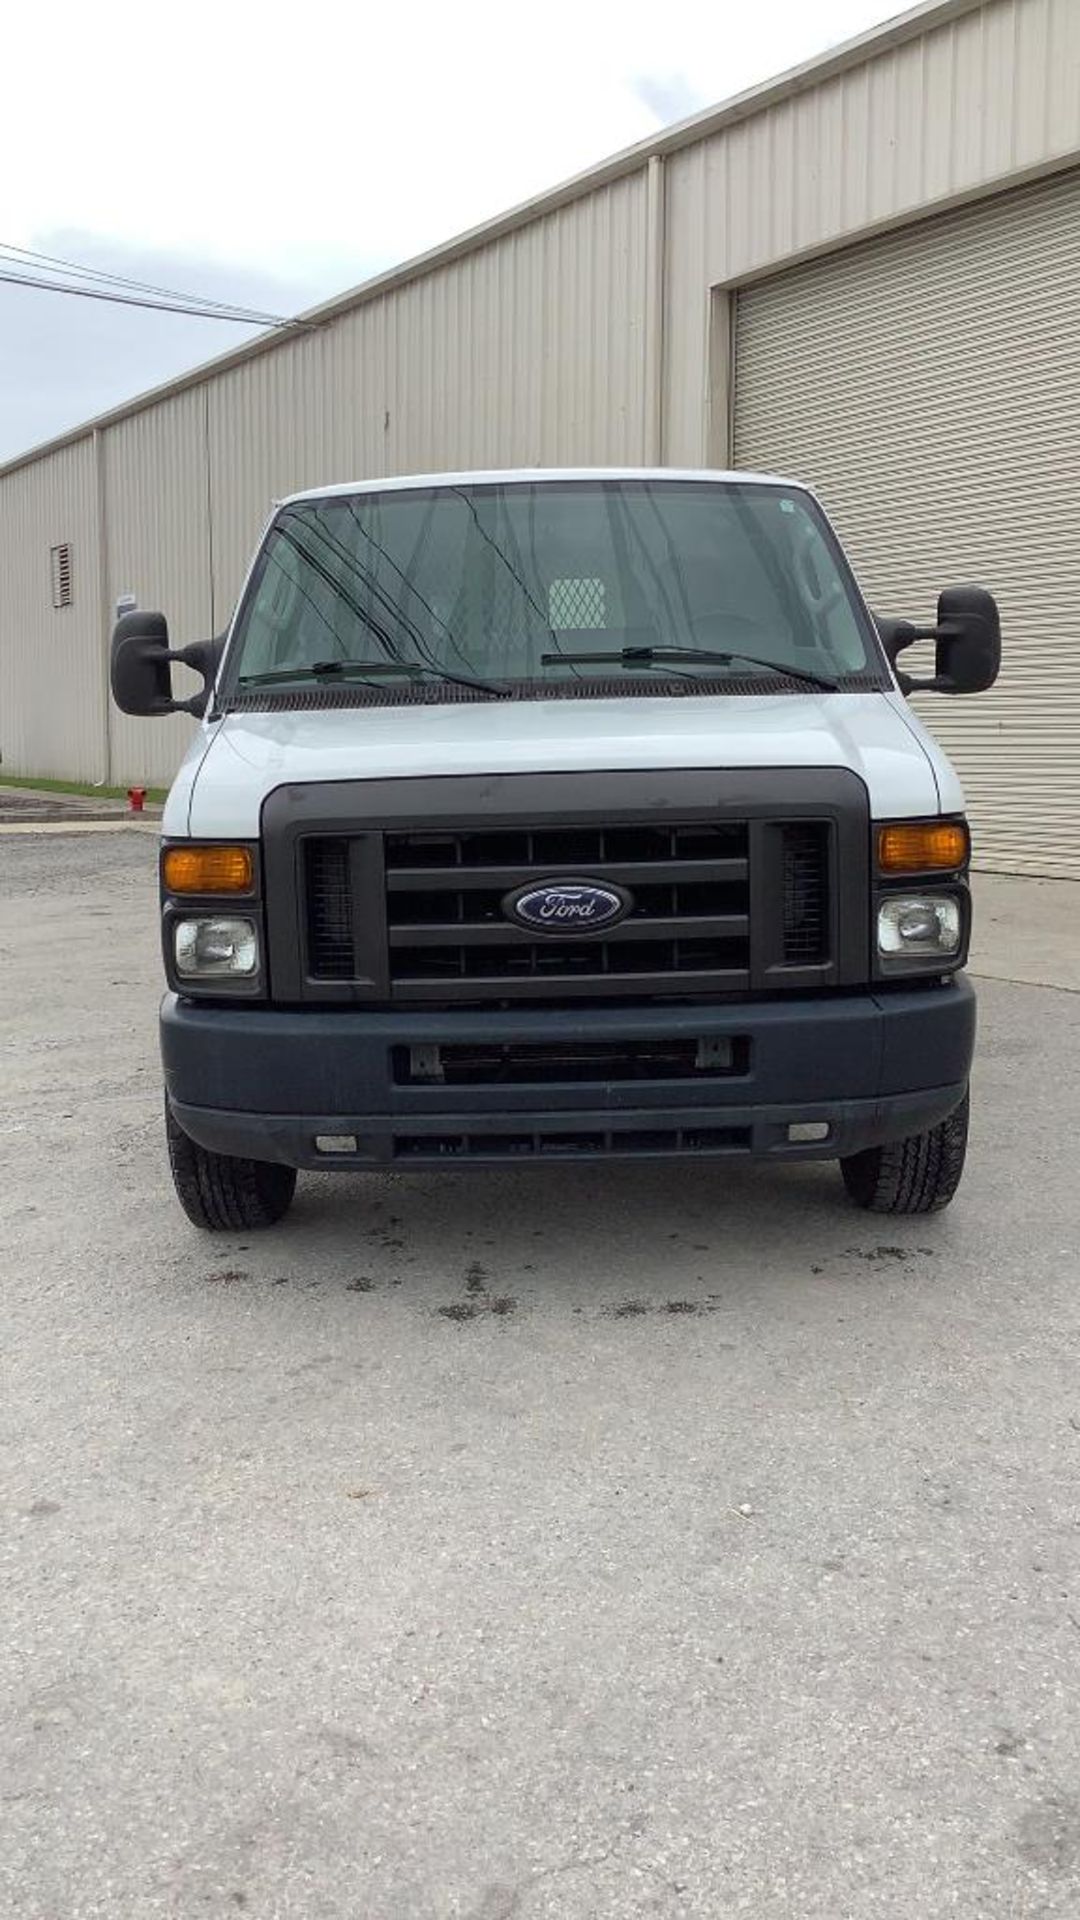 2009 Ford E-350 Cargo Van 2WD Super Duty - Image 5 of 74